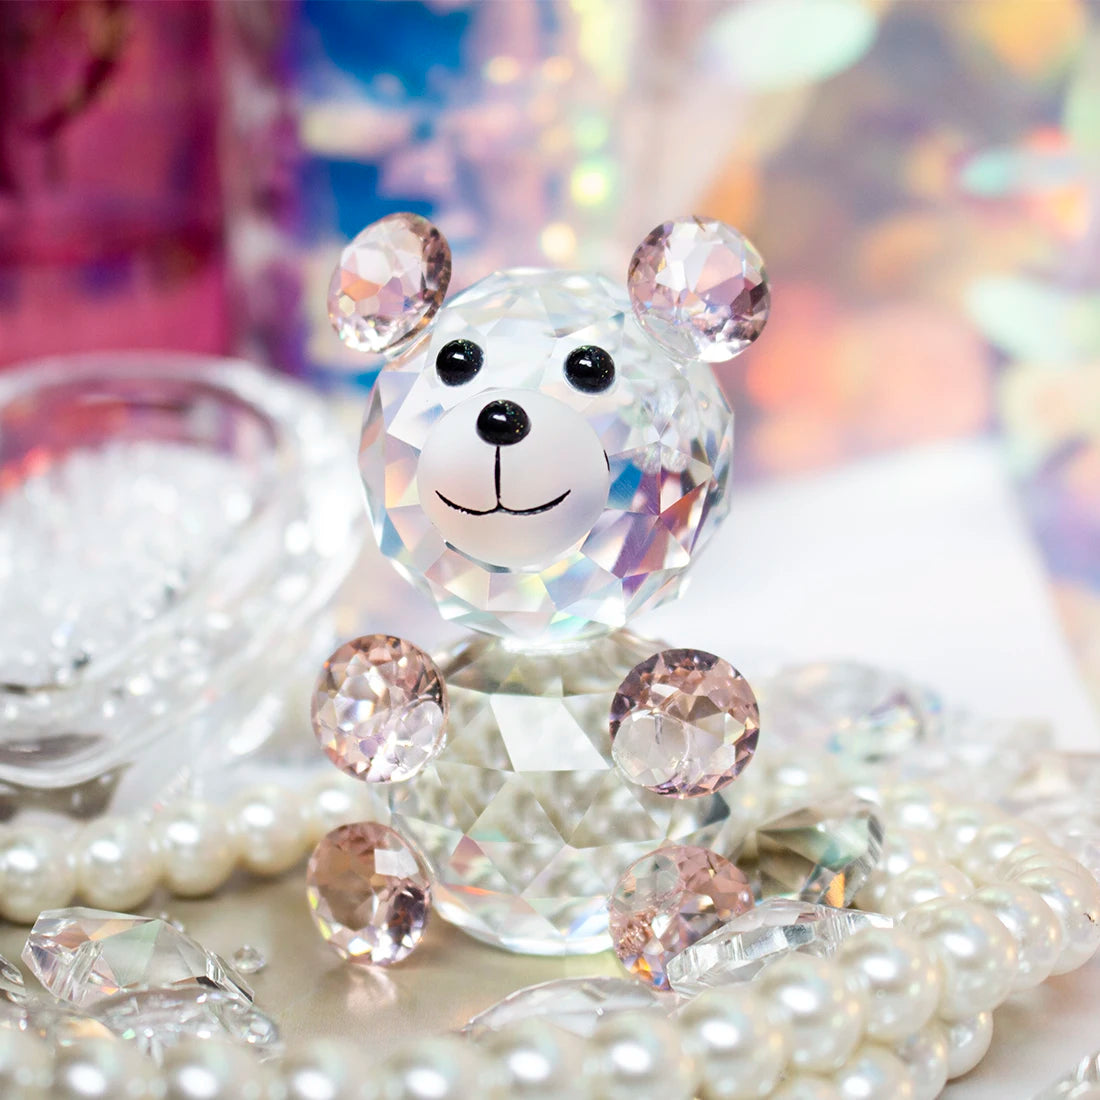 H&D Pink 3D Little Bear Crystal Figurine Art Glass Animal Paperweight Ornament Collectible Xmas Gift Home Wedding Decoration